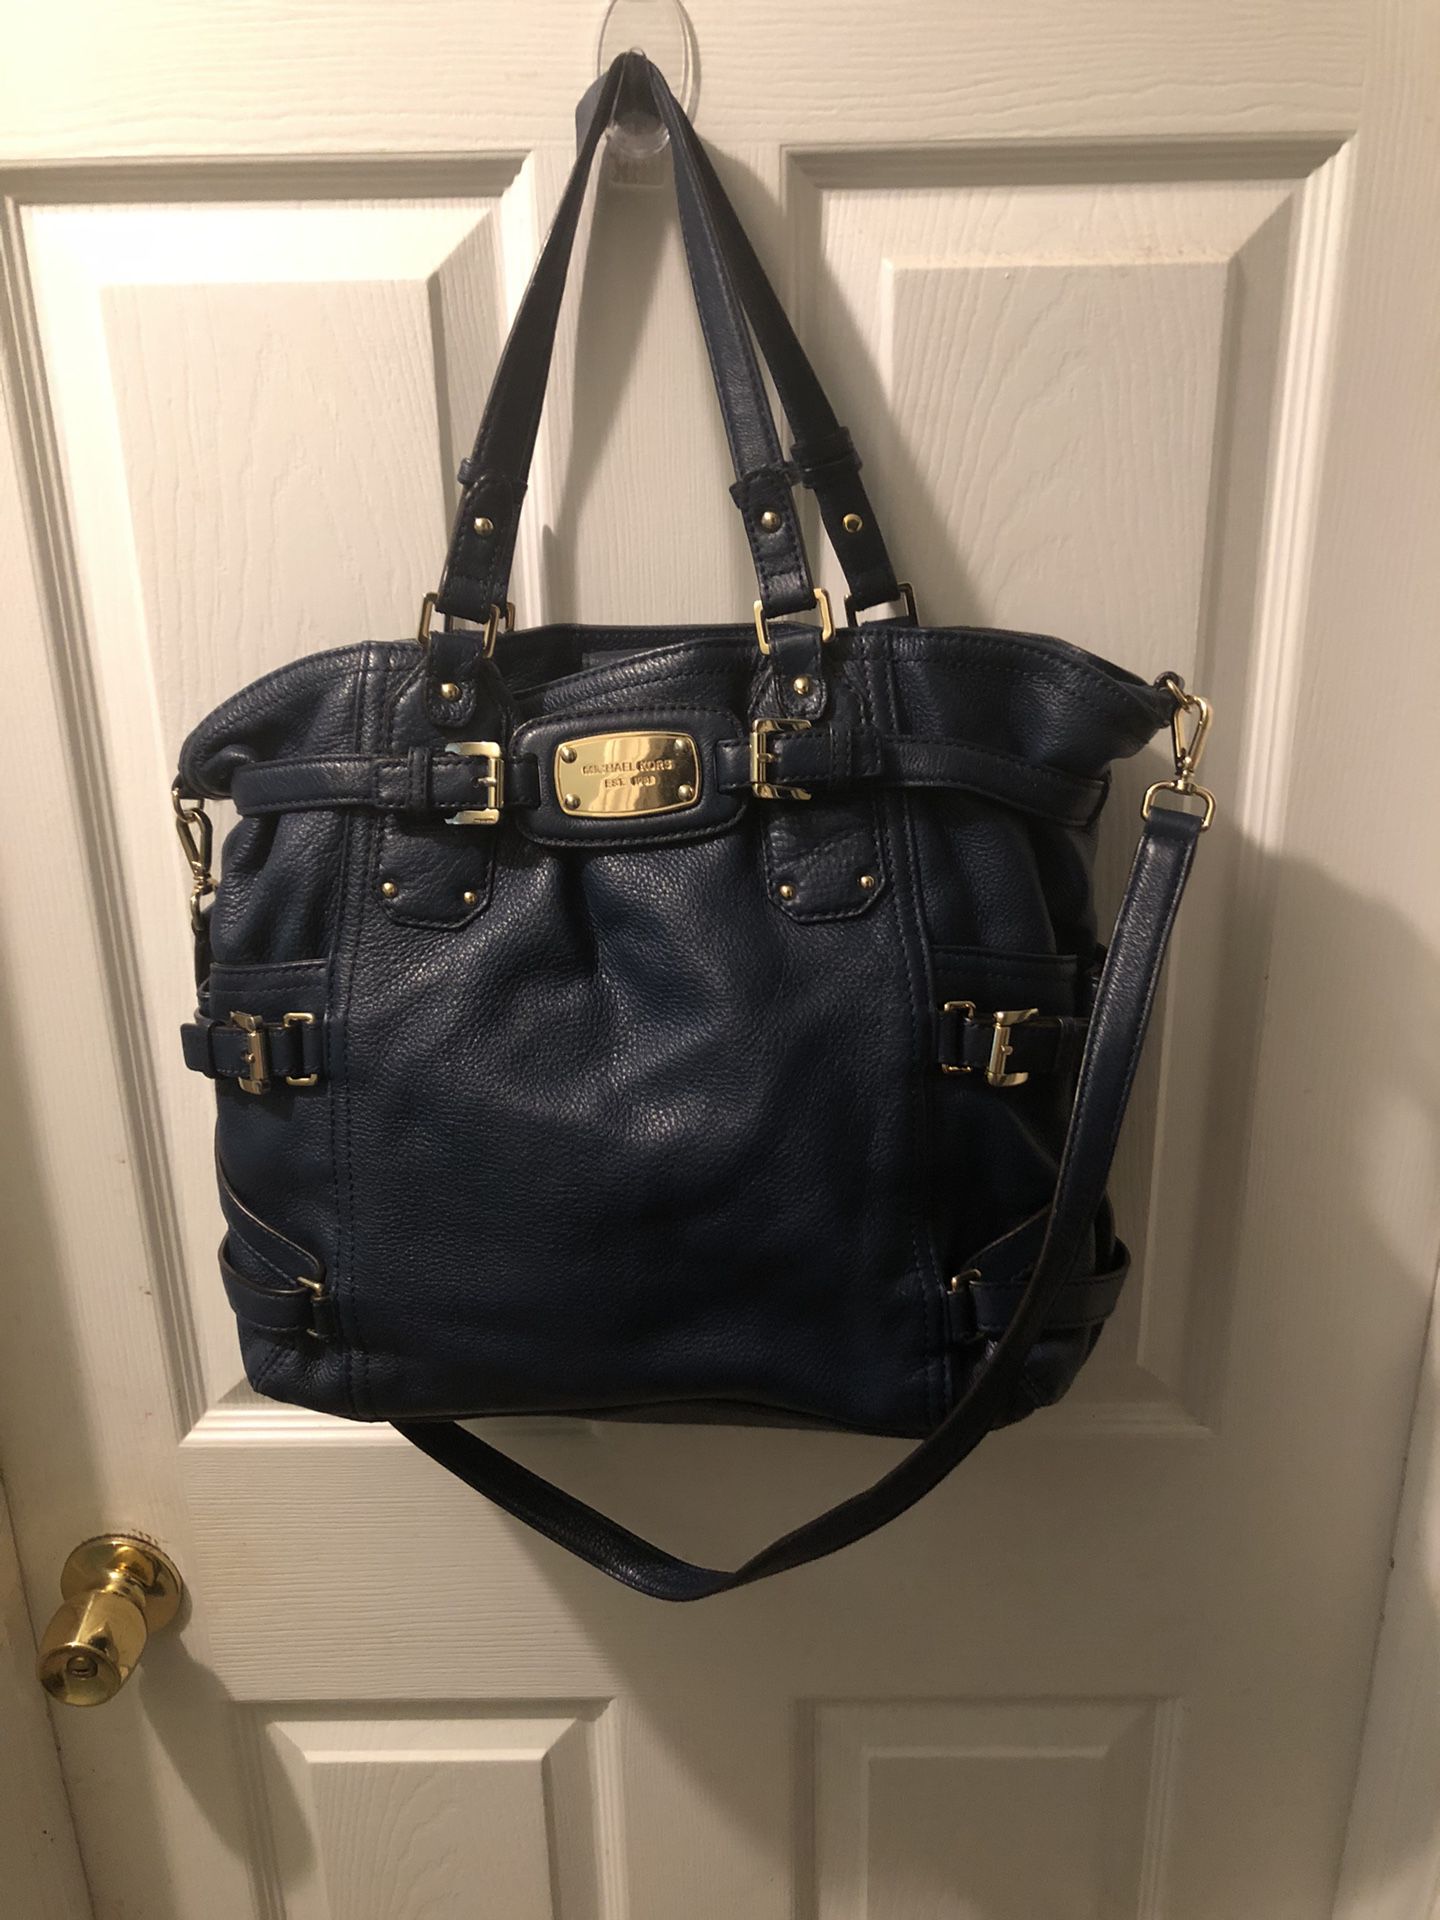 Navy Blue Large  Leather Michael Kors Purse Good Condition Lots Of Gold Tone Metal  2 Type Of Handles 